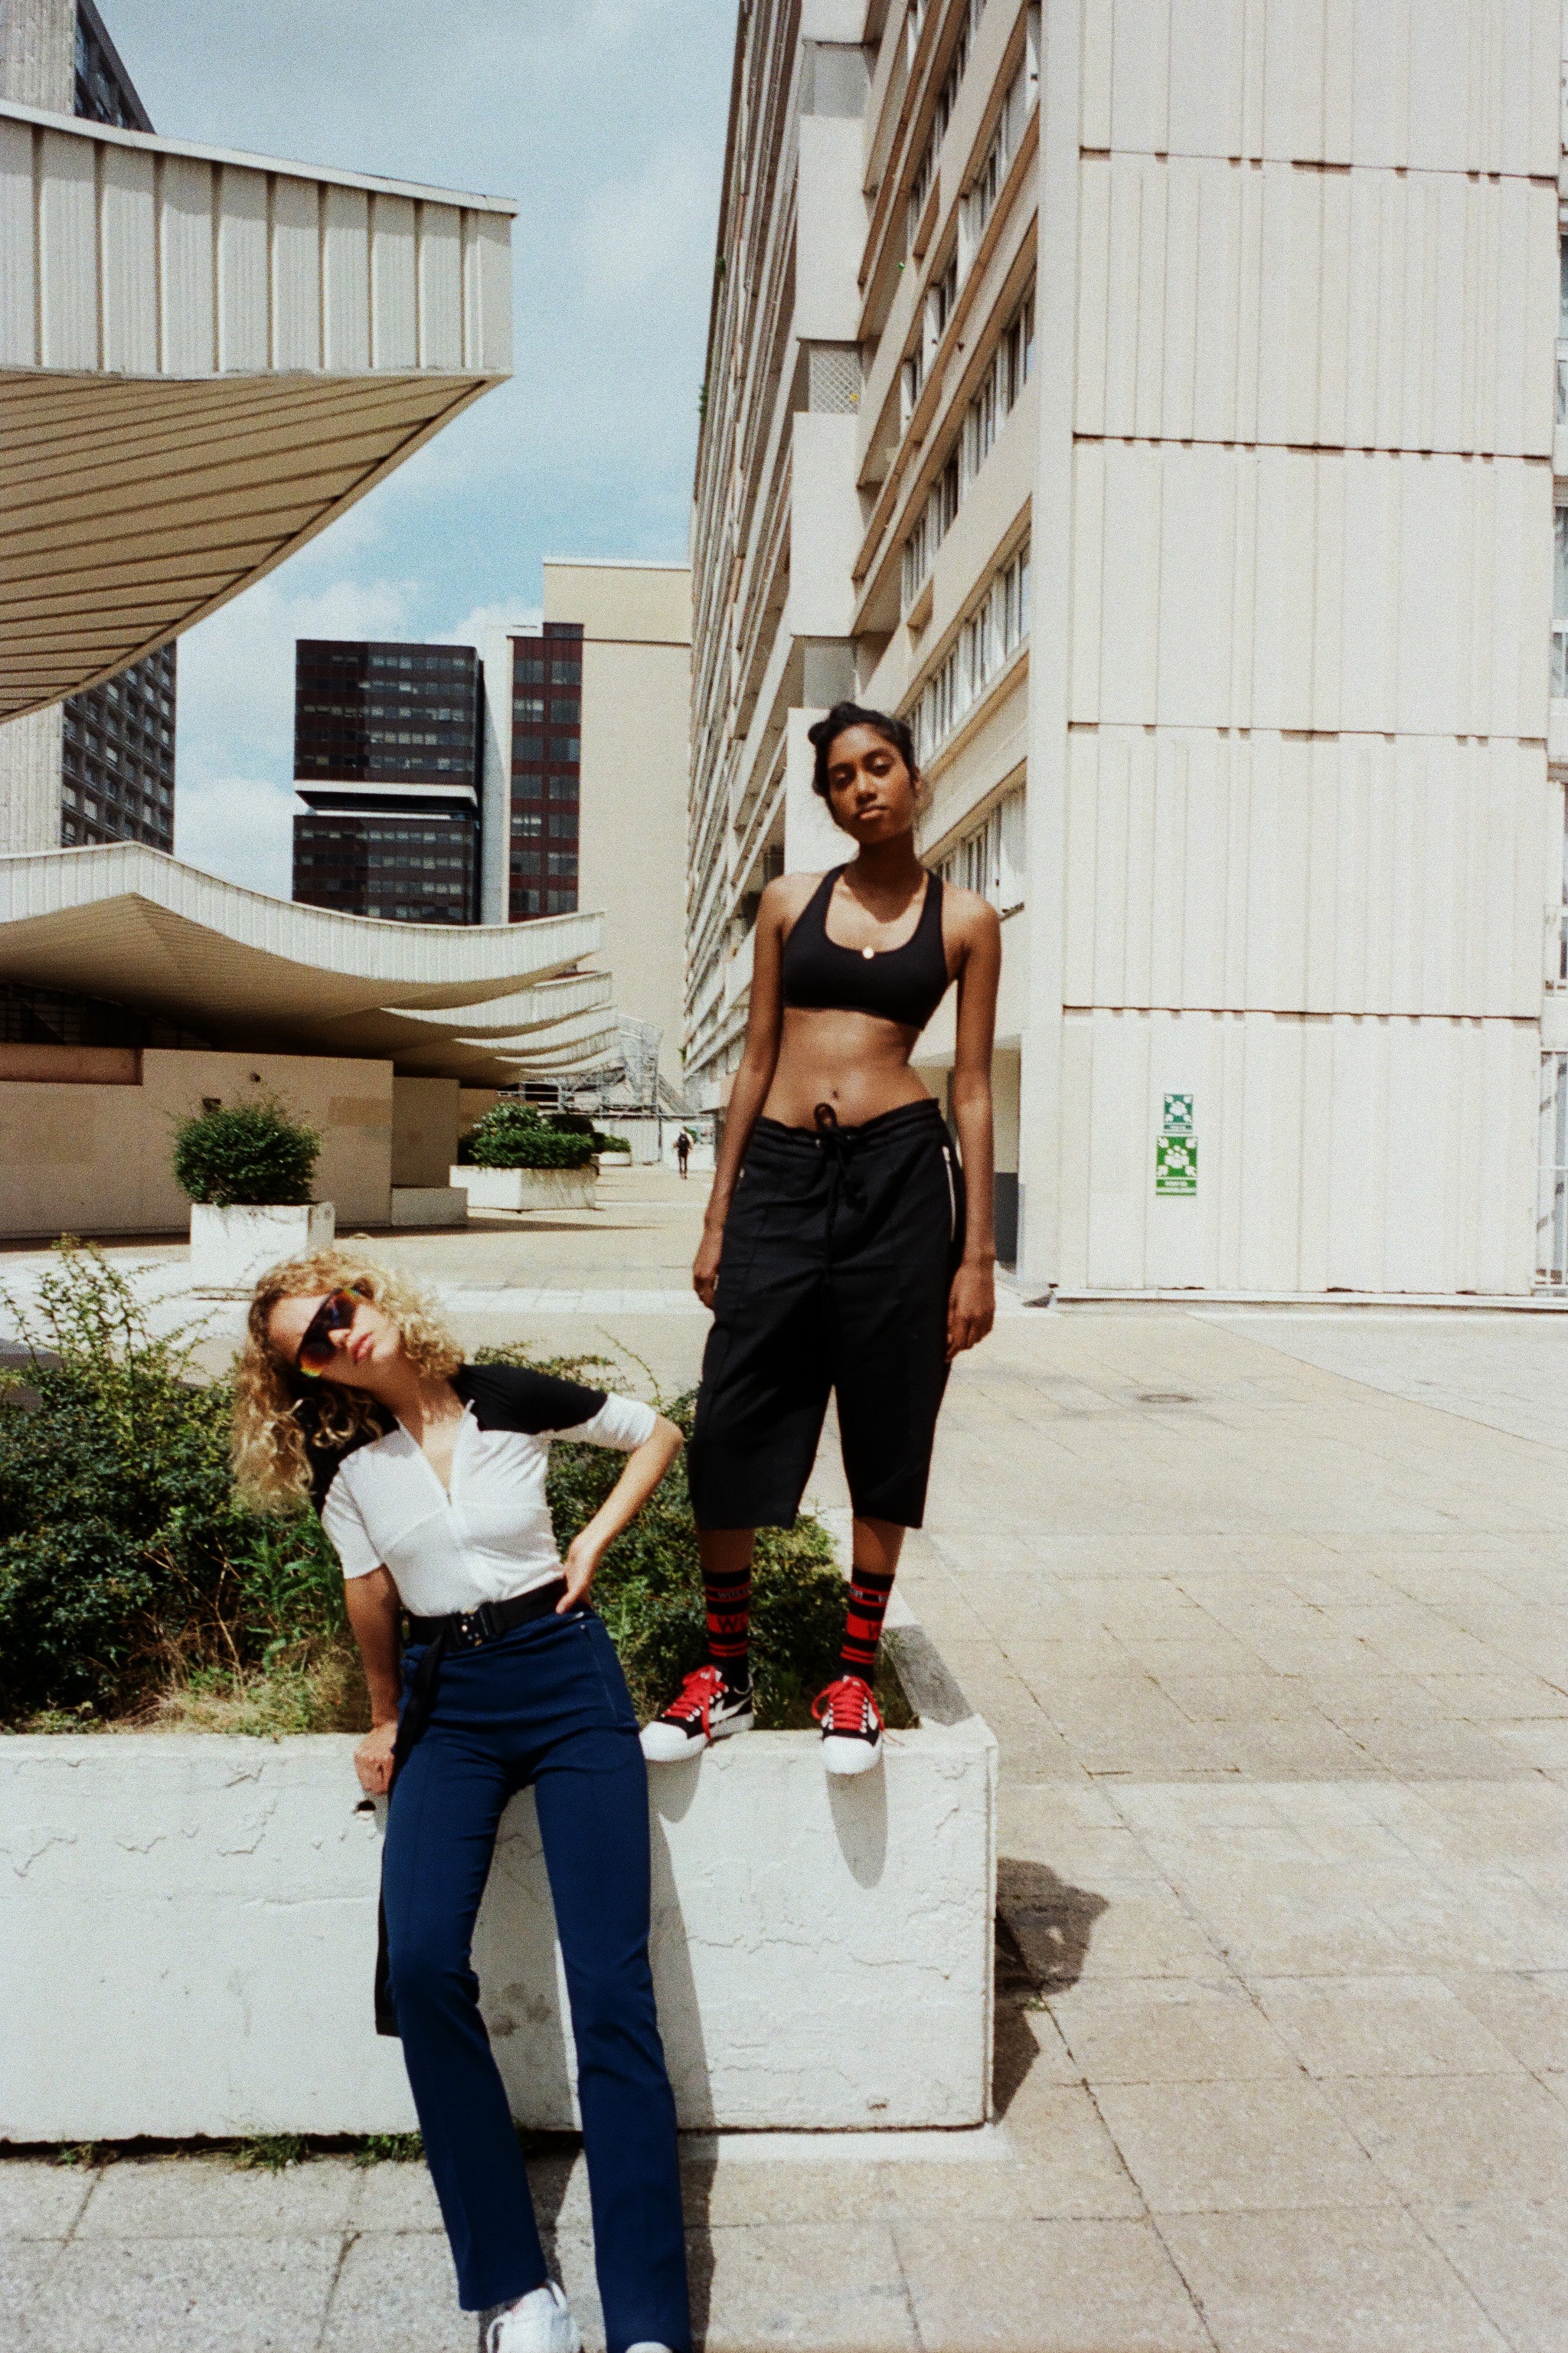 WOS33 Captures the Paris Youth in its Campaign Streetwear Lookbook Editorial